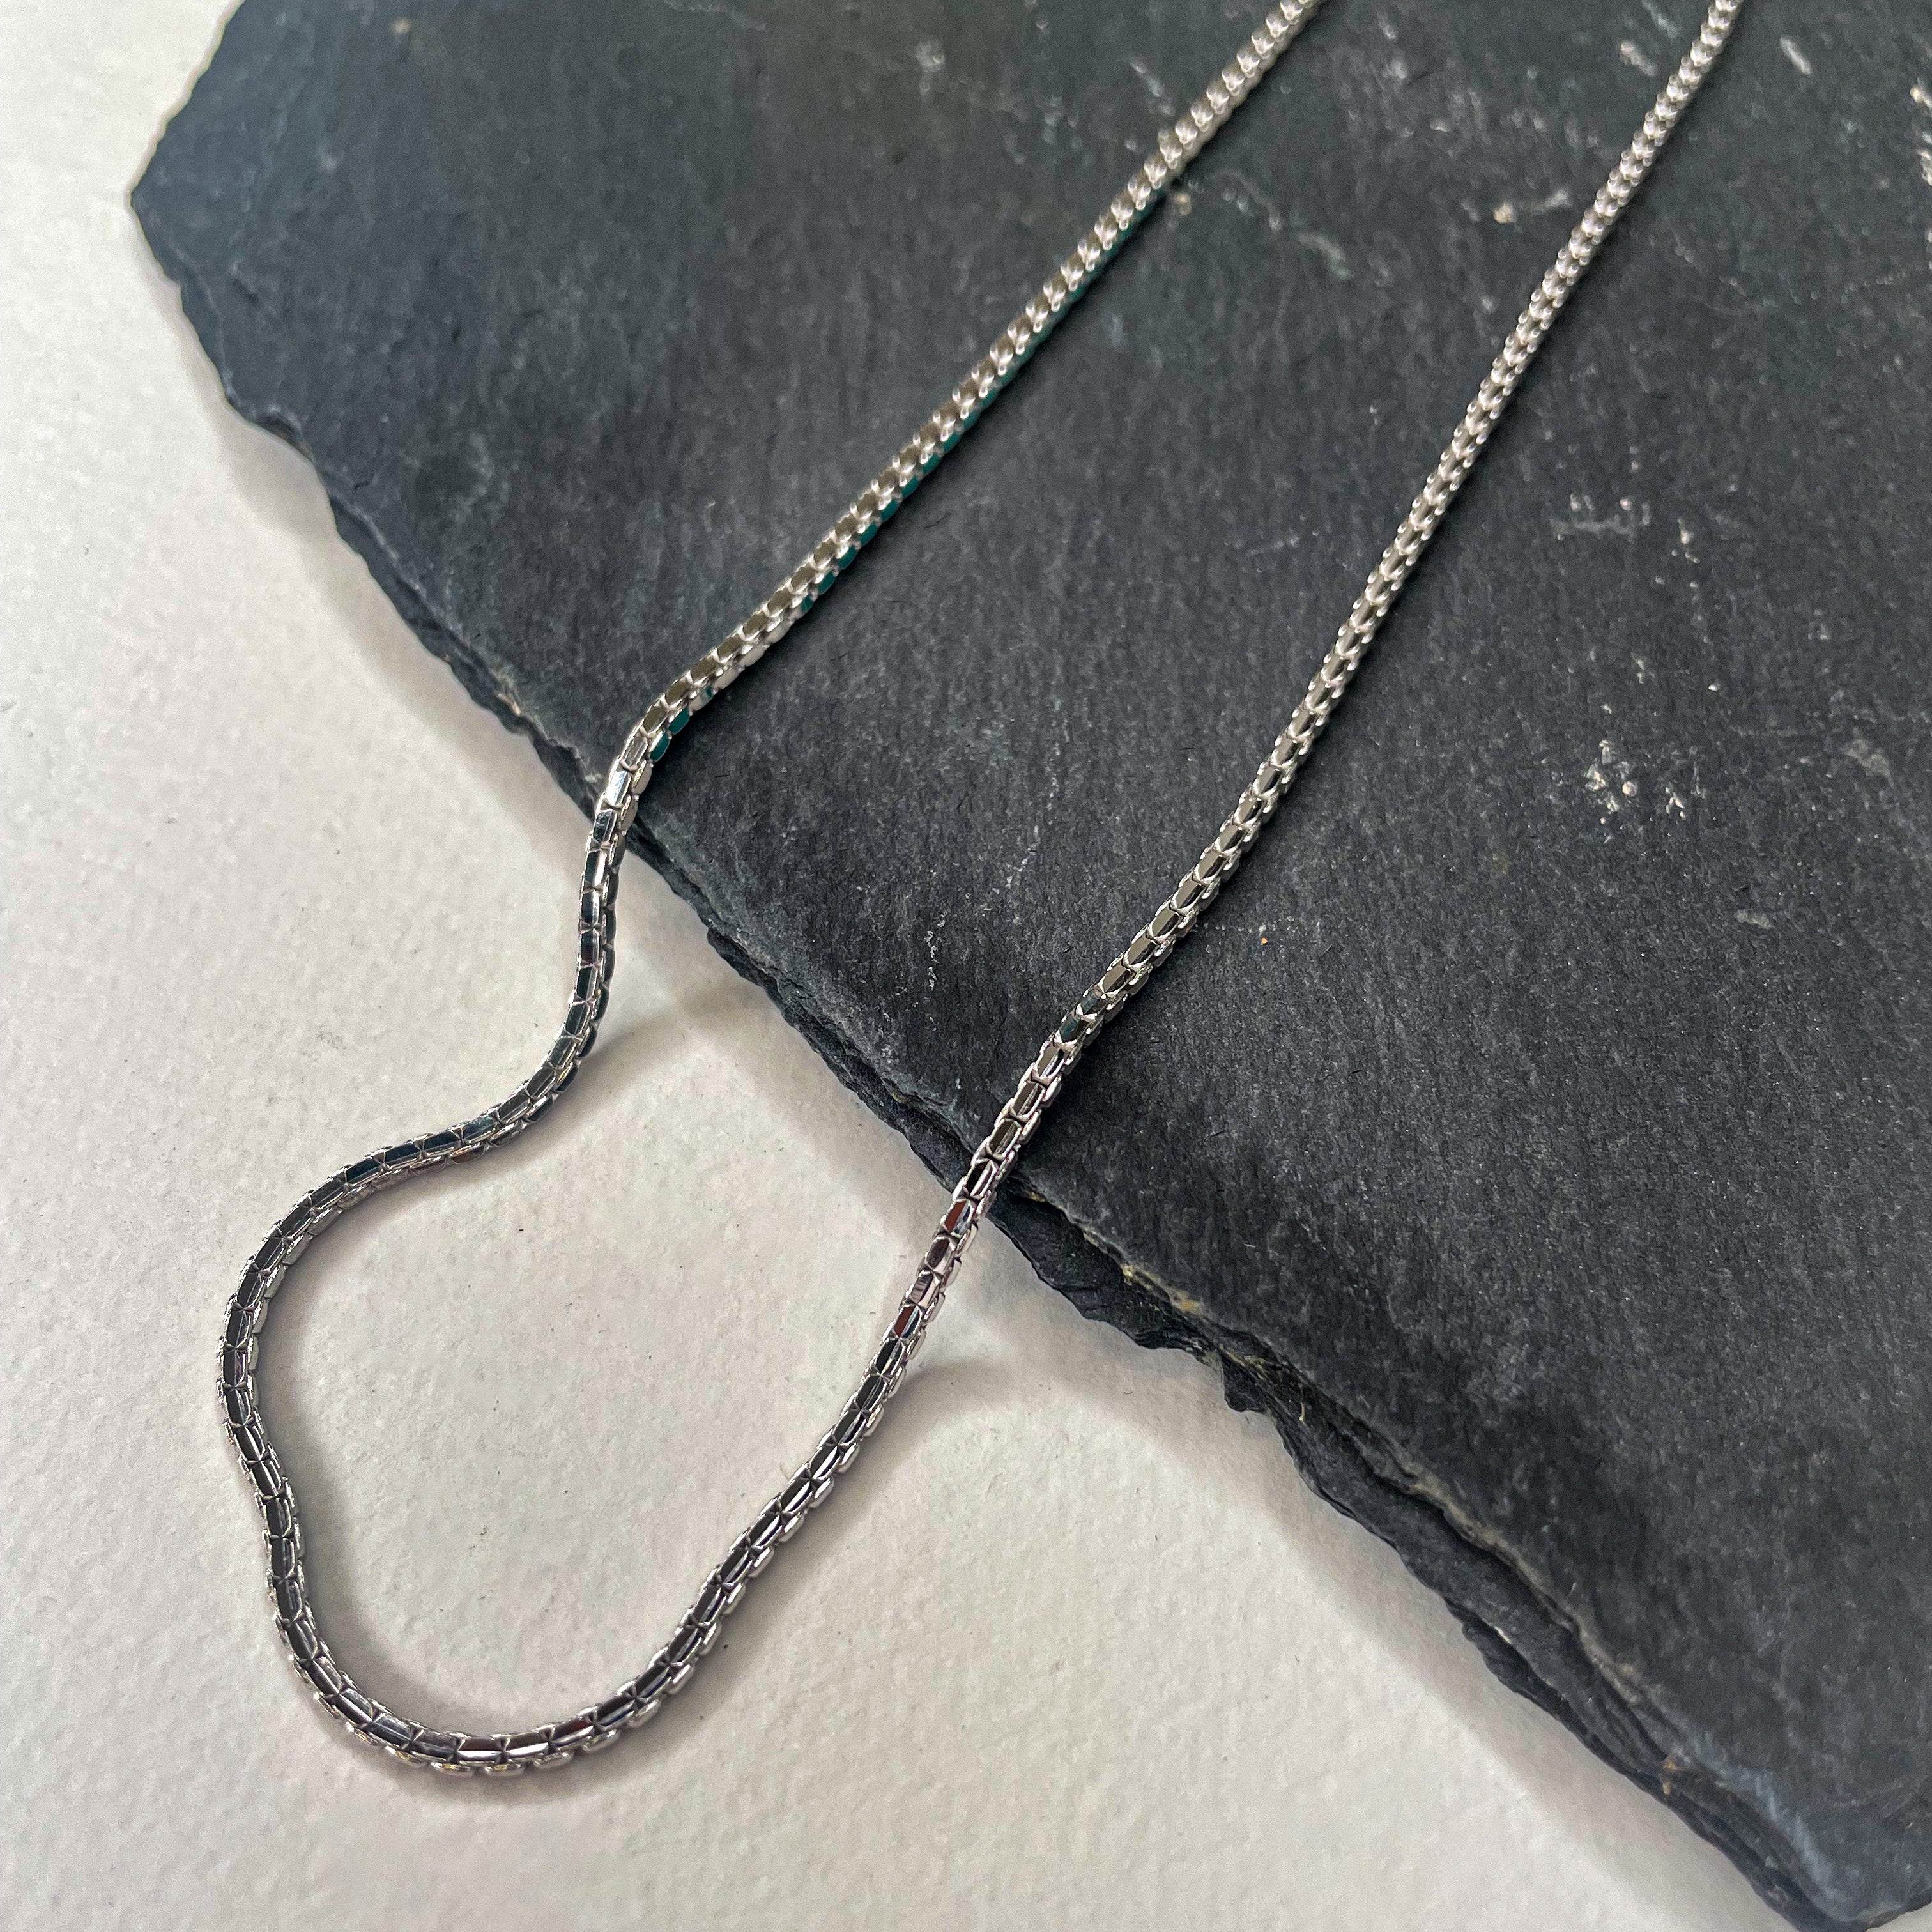 Inverted box chain necklace